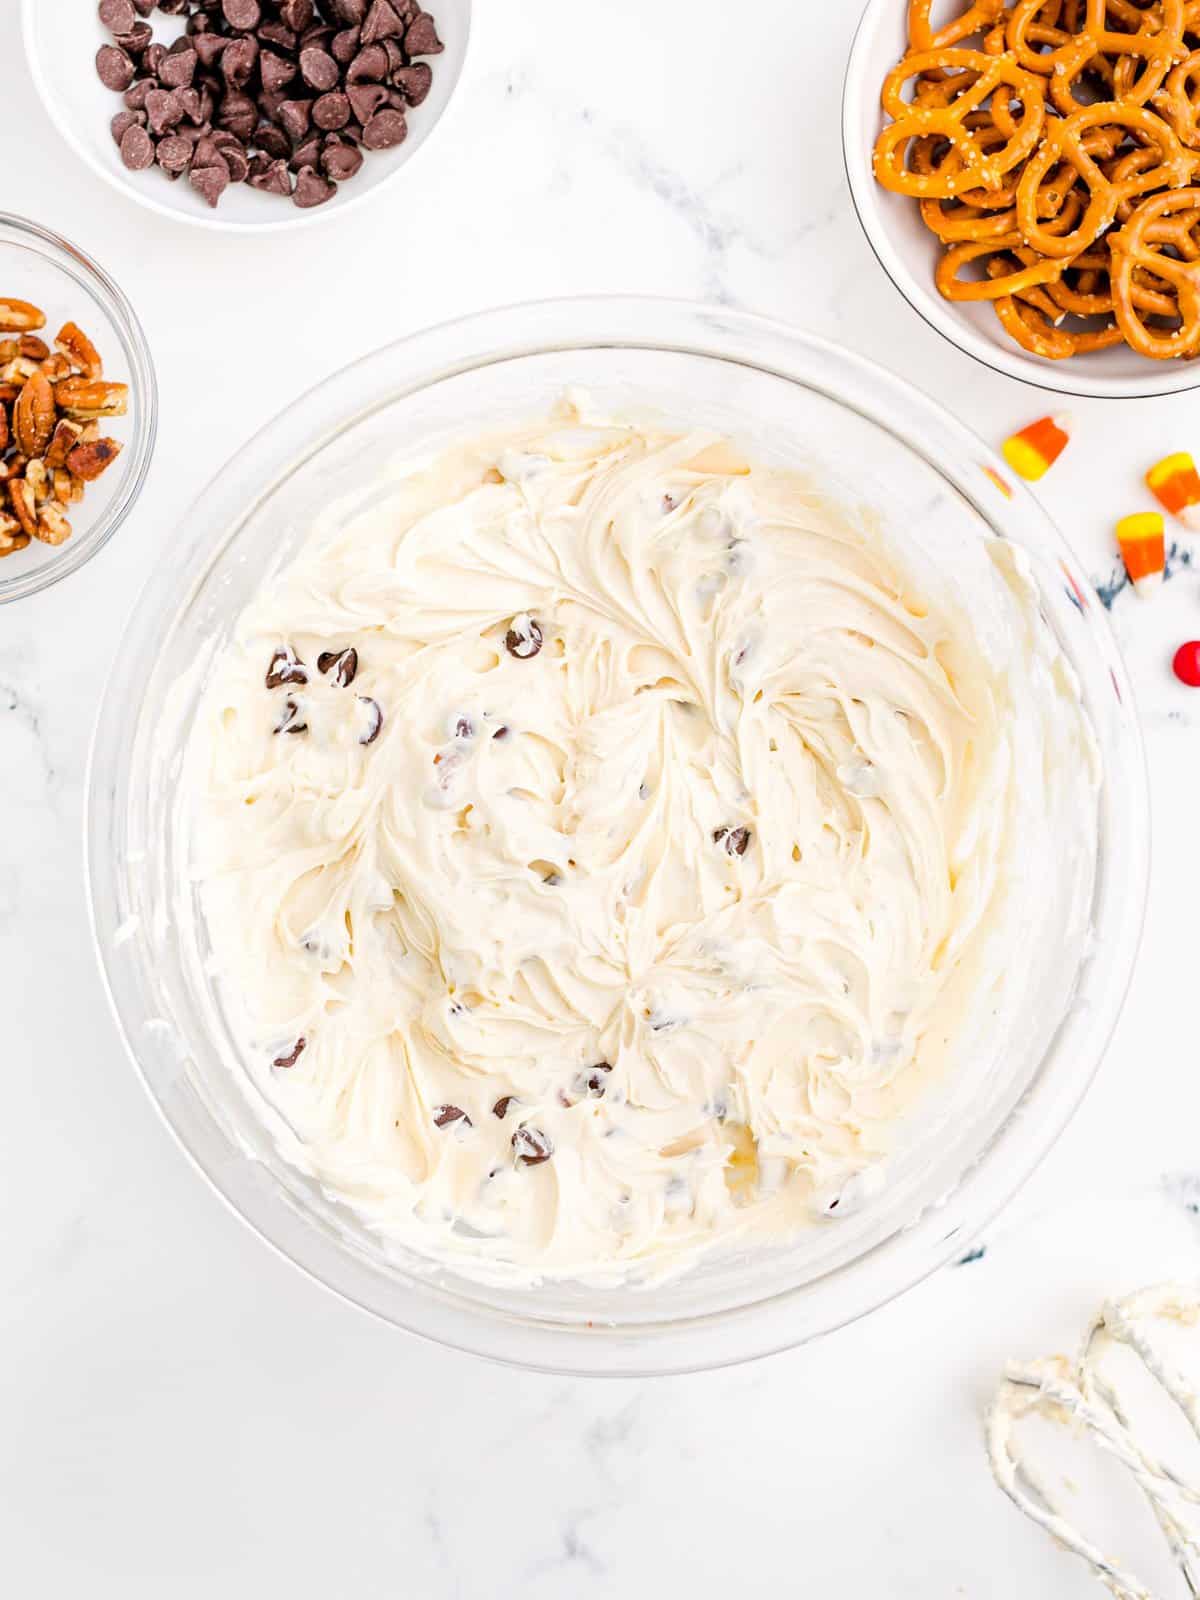 Brown sugar, vanilla, pecans and chocolate chips mixed into the cream cheese mixture in bowl.